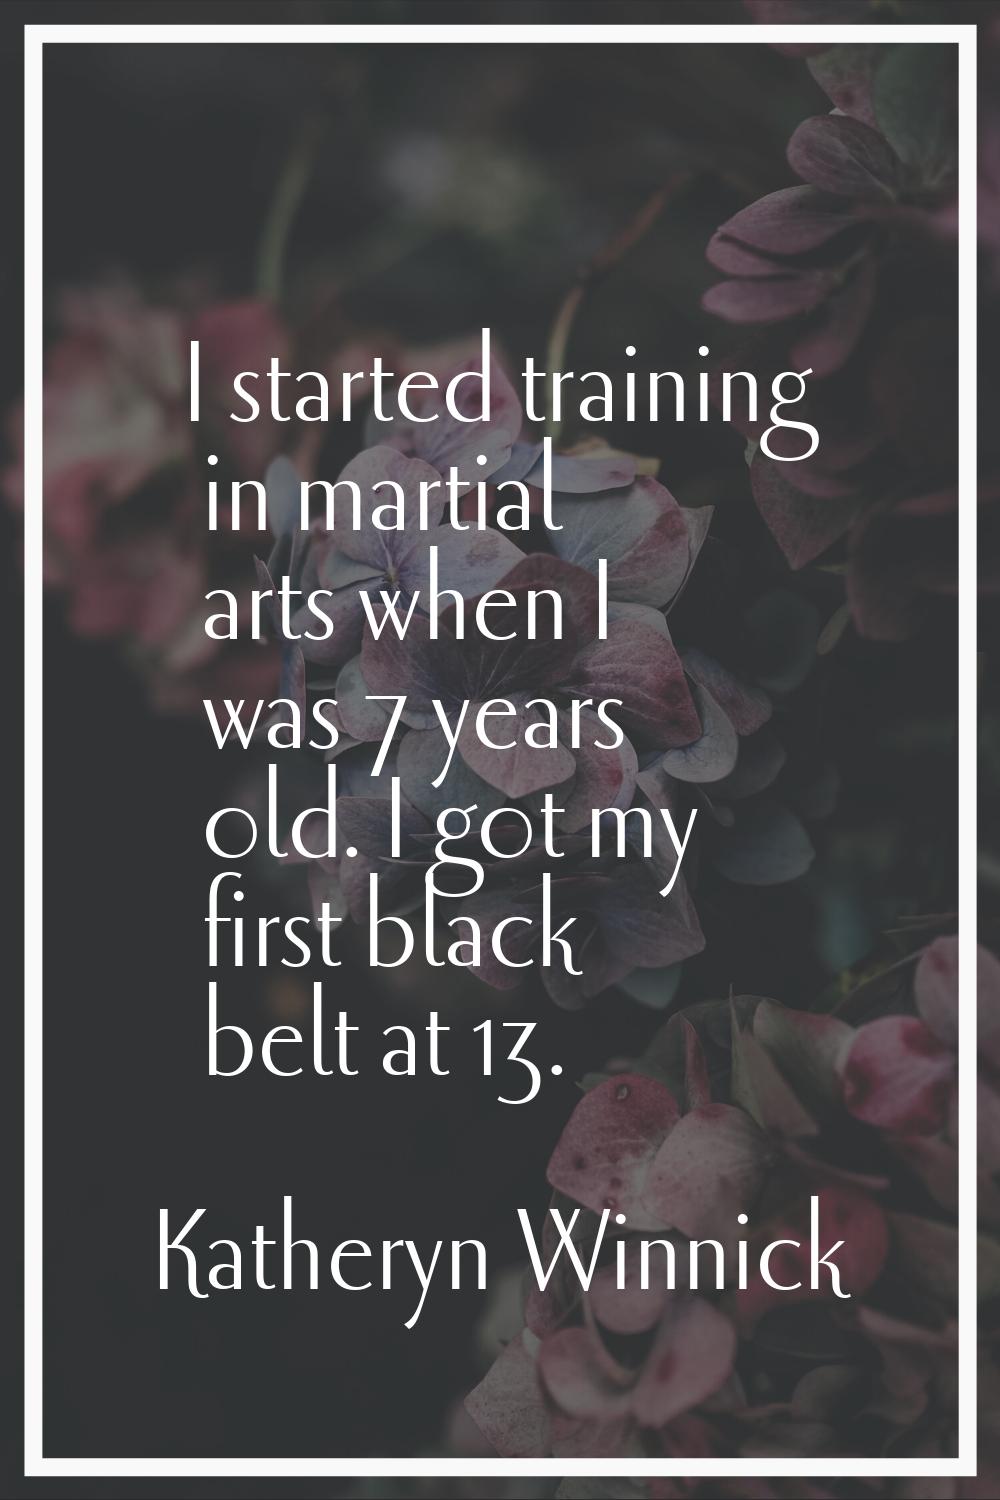 I started training in martial arts when I was 7 years old. I got my first black belt at 13.